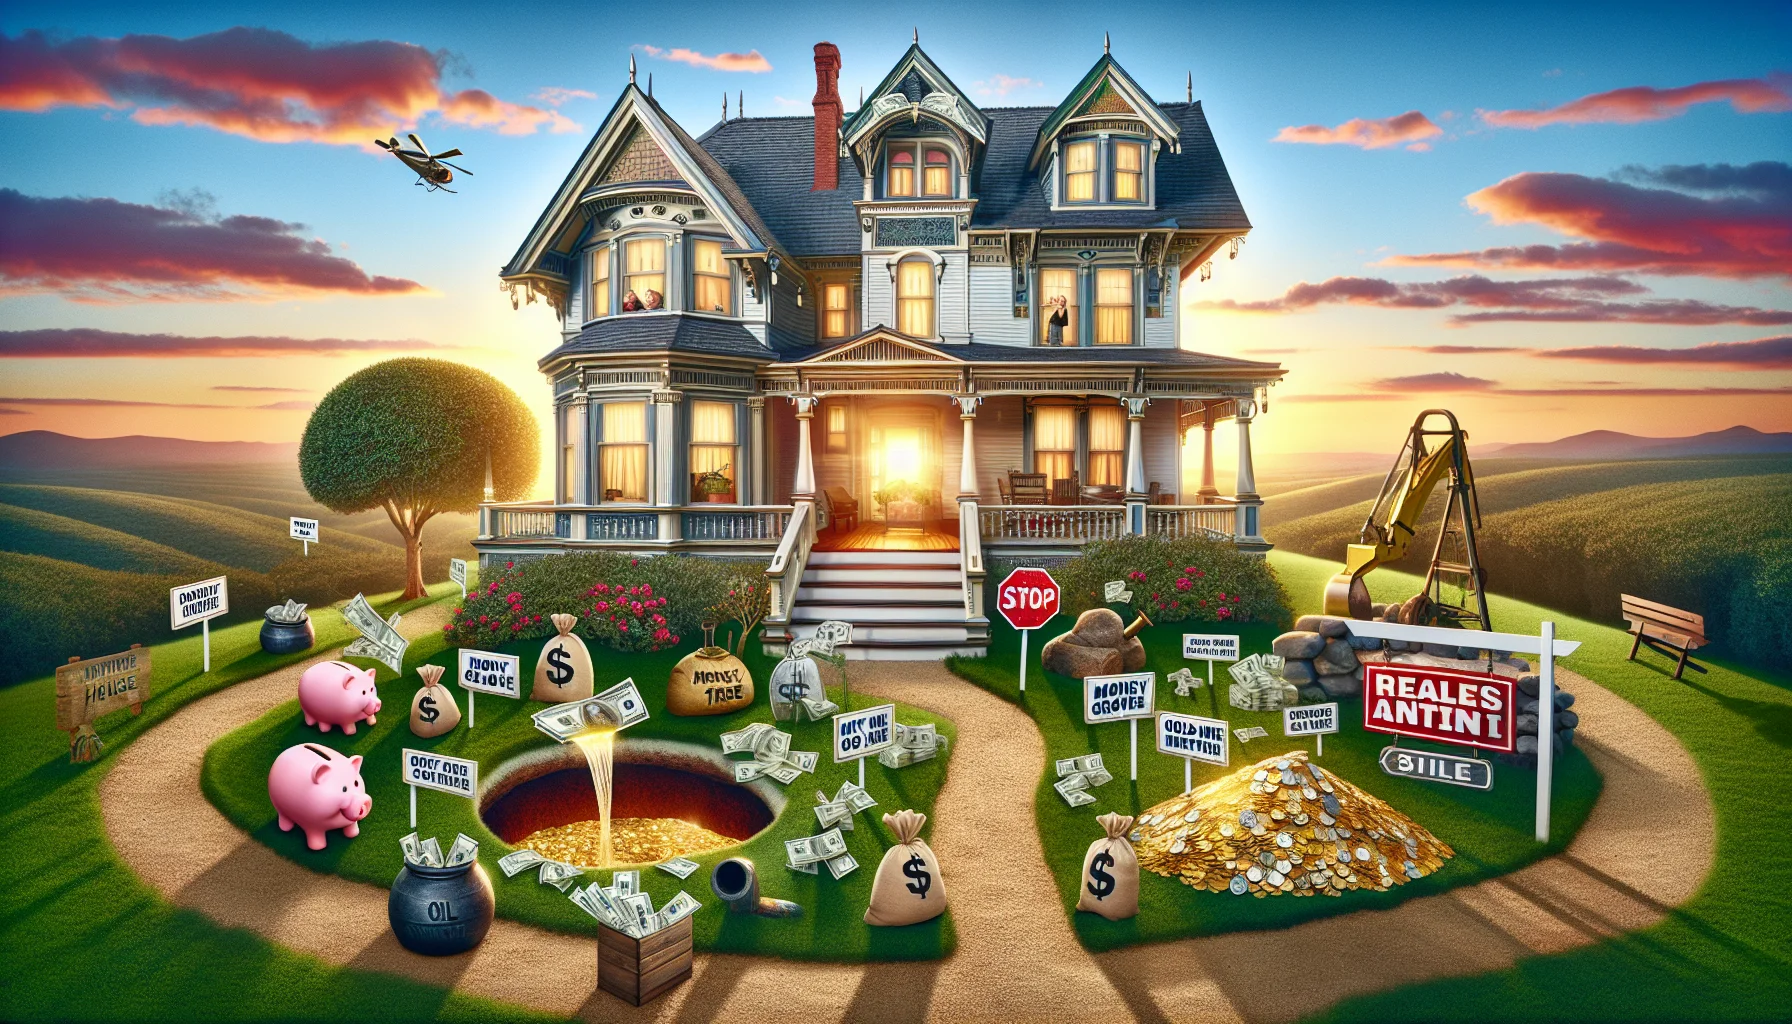 Imagine the ideal, humorous image of an investment house scenario in the realm of real estate. Picture a pristinely maintained, three-story Victorian-style house, set on a hill with the sun setting behind it. The yard is dotted with signs highlighting laughingly improbable features: a money tree grove, a gold mine entrance, and an oil well. Humorous elements are scattered around: a piggy bank buried like treasure, dollar bills growing on bushes and real estate agents with overjoyed expressions, counting stacks of money. It's a hilarious exaggeration of a perfect real estate investment scenario.